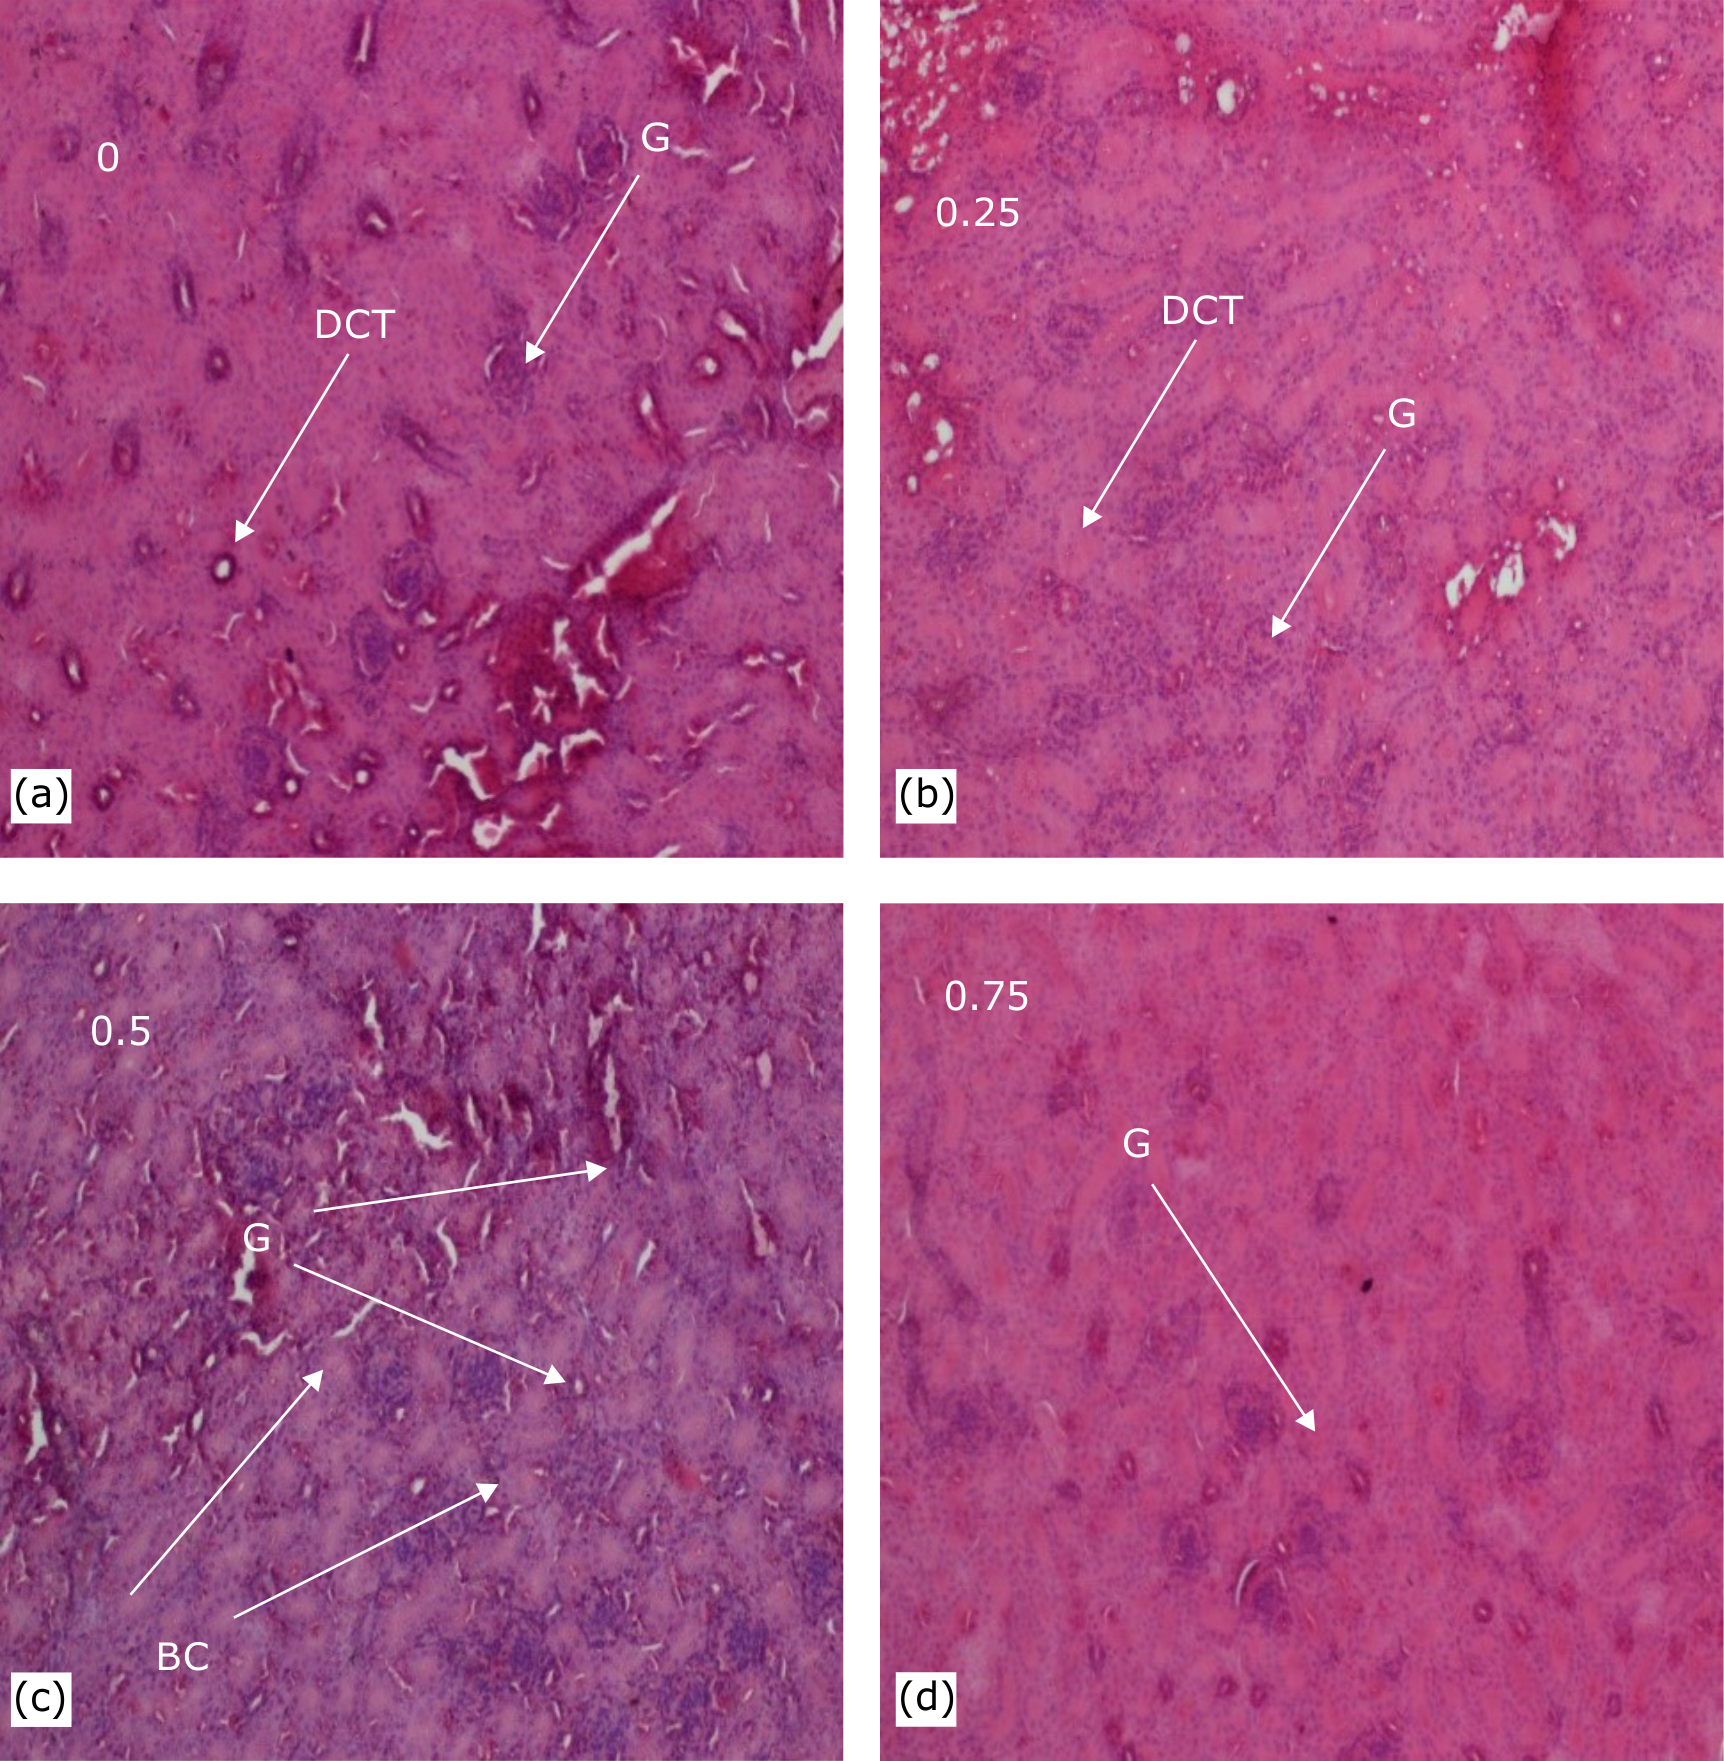 Fig. 2(a-d): Effects of Mangifera indica leaf powder in feed on kidney histology of Brahma hen. 0 (control), 0.25, 0.5 and 0.75: Doses of Mangifera indica leaf powder (g), G: glomerulus, BC: Bowman's capsule and DCT: Distal convoluted tube